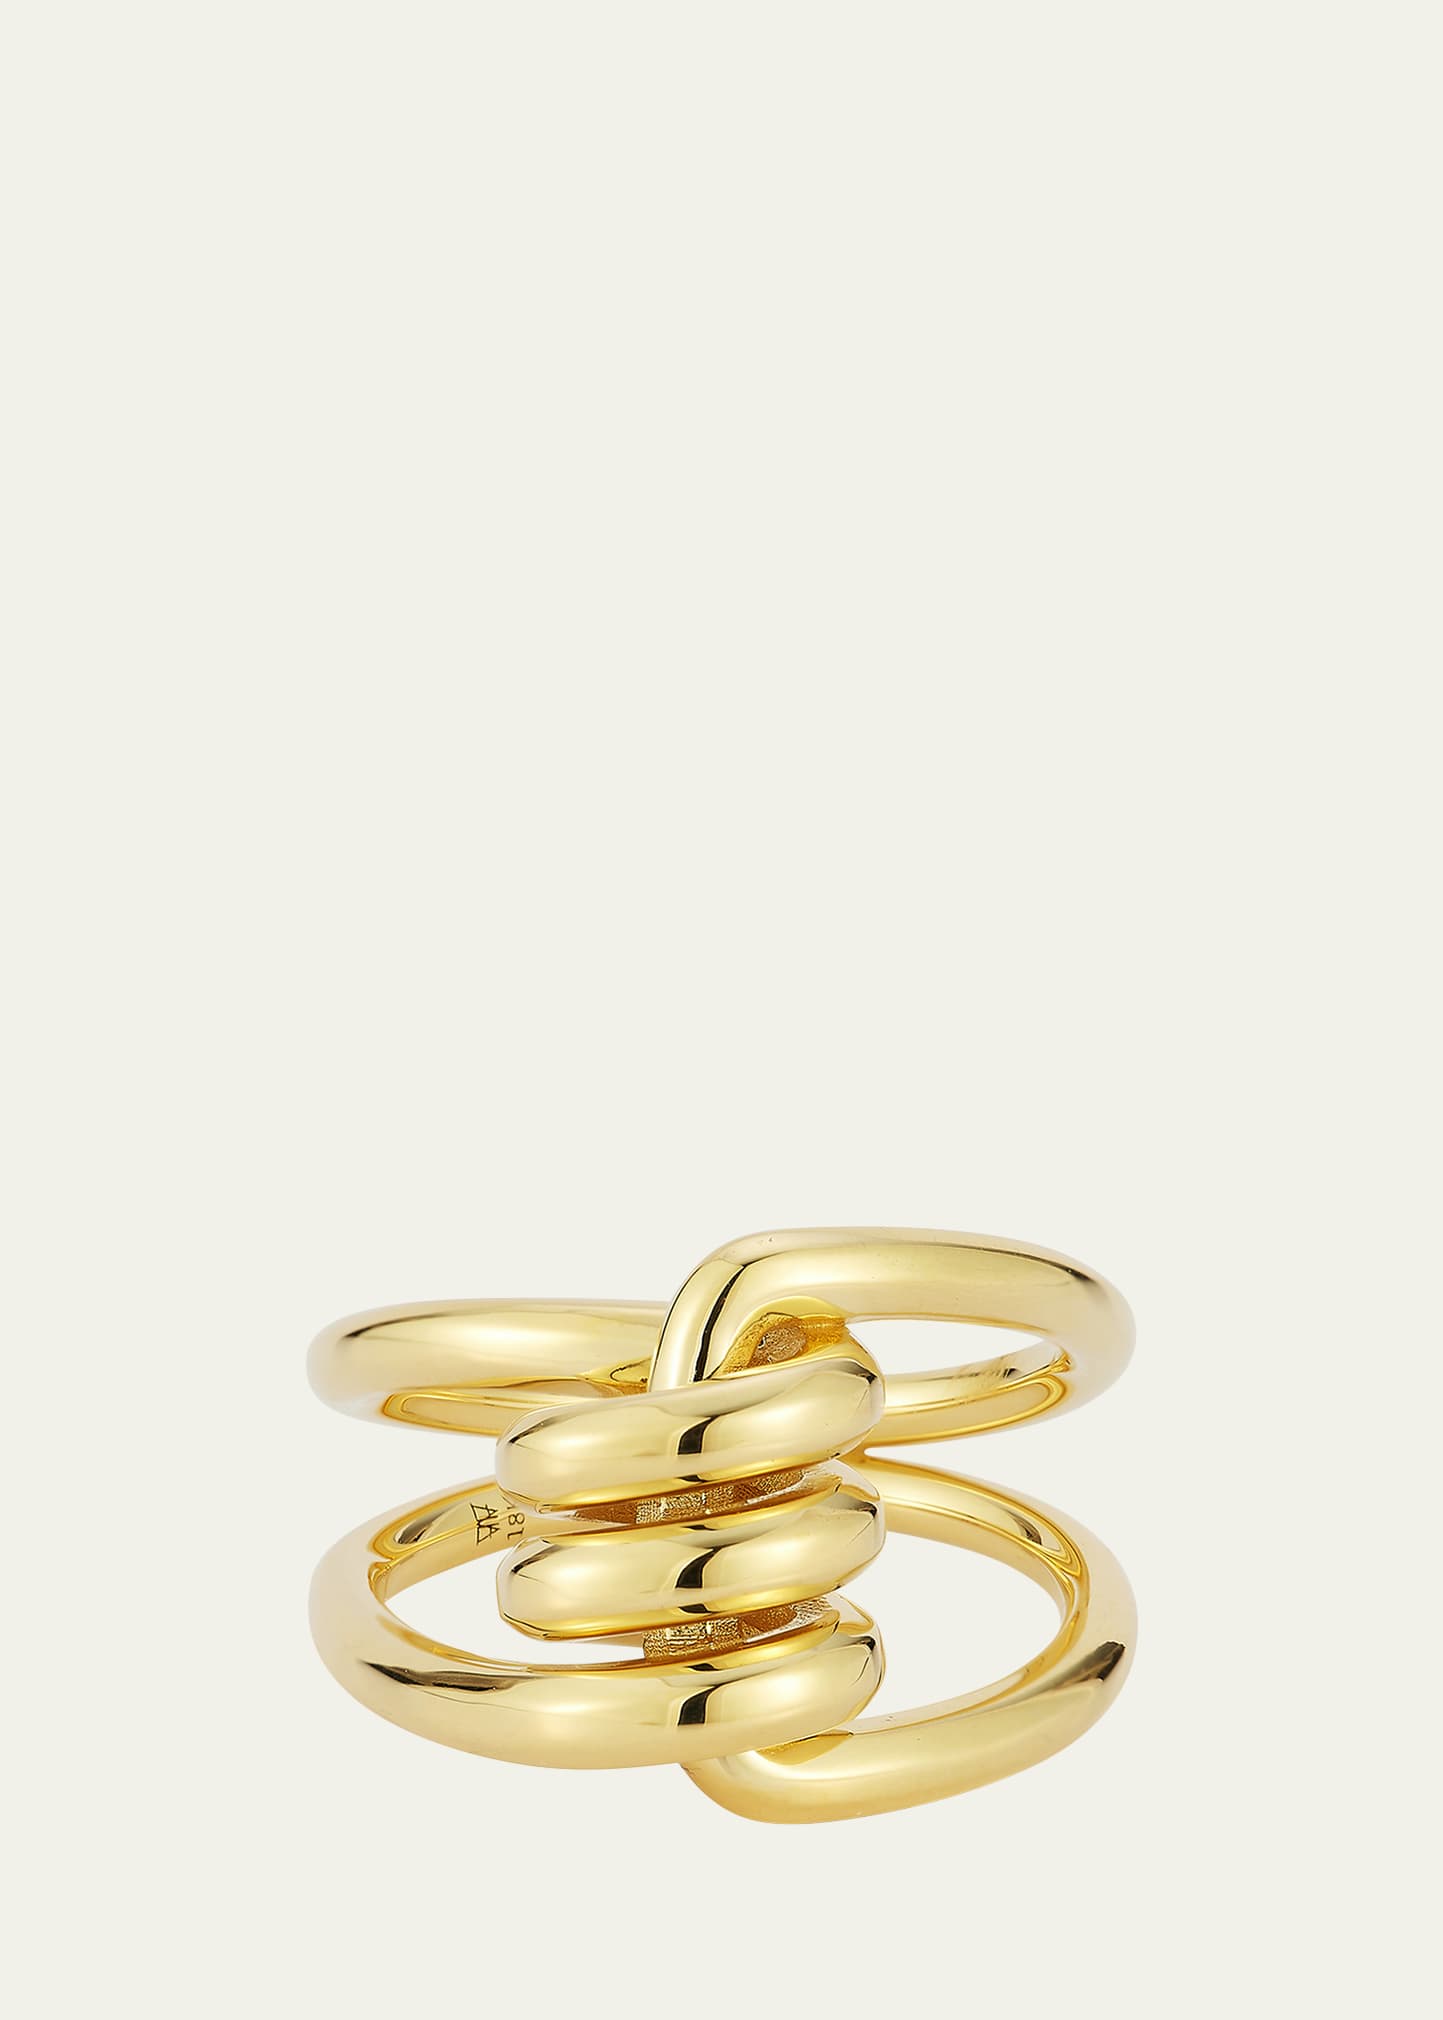 Huxley 18K Yellow Gold Single Coil Link Ring, Size 7